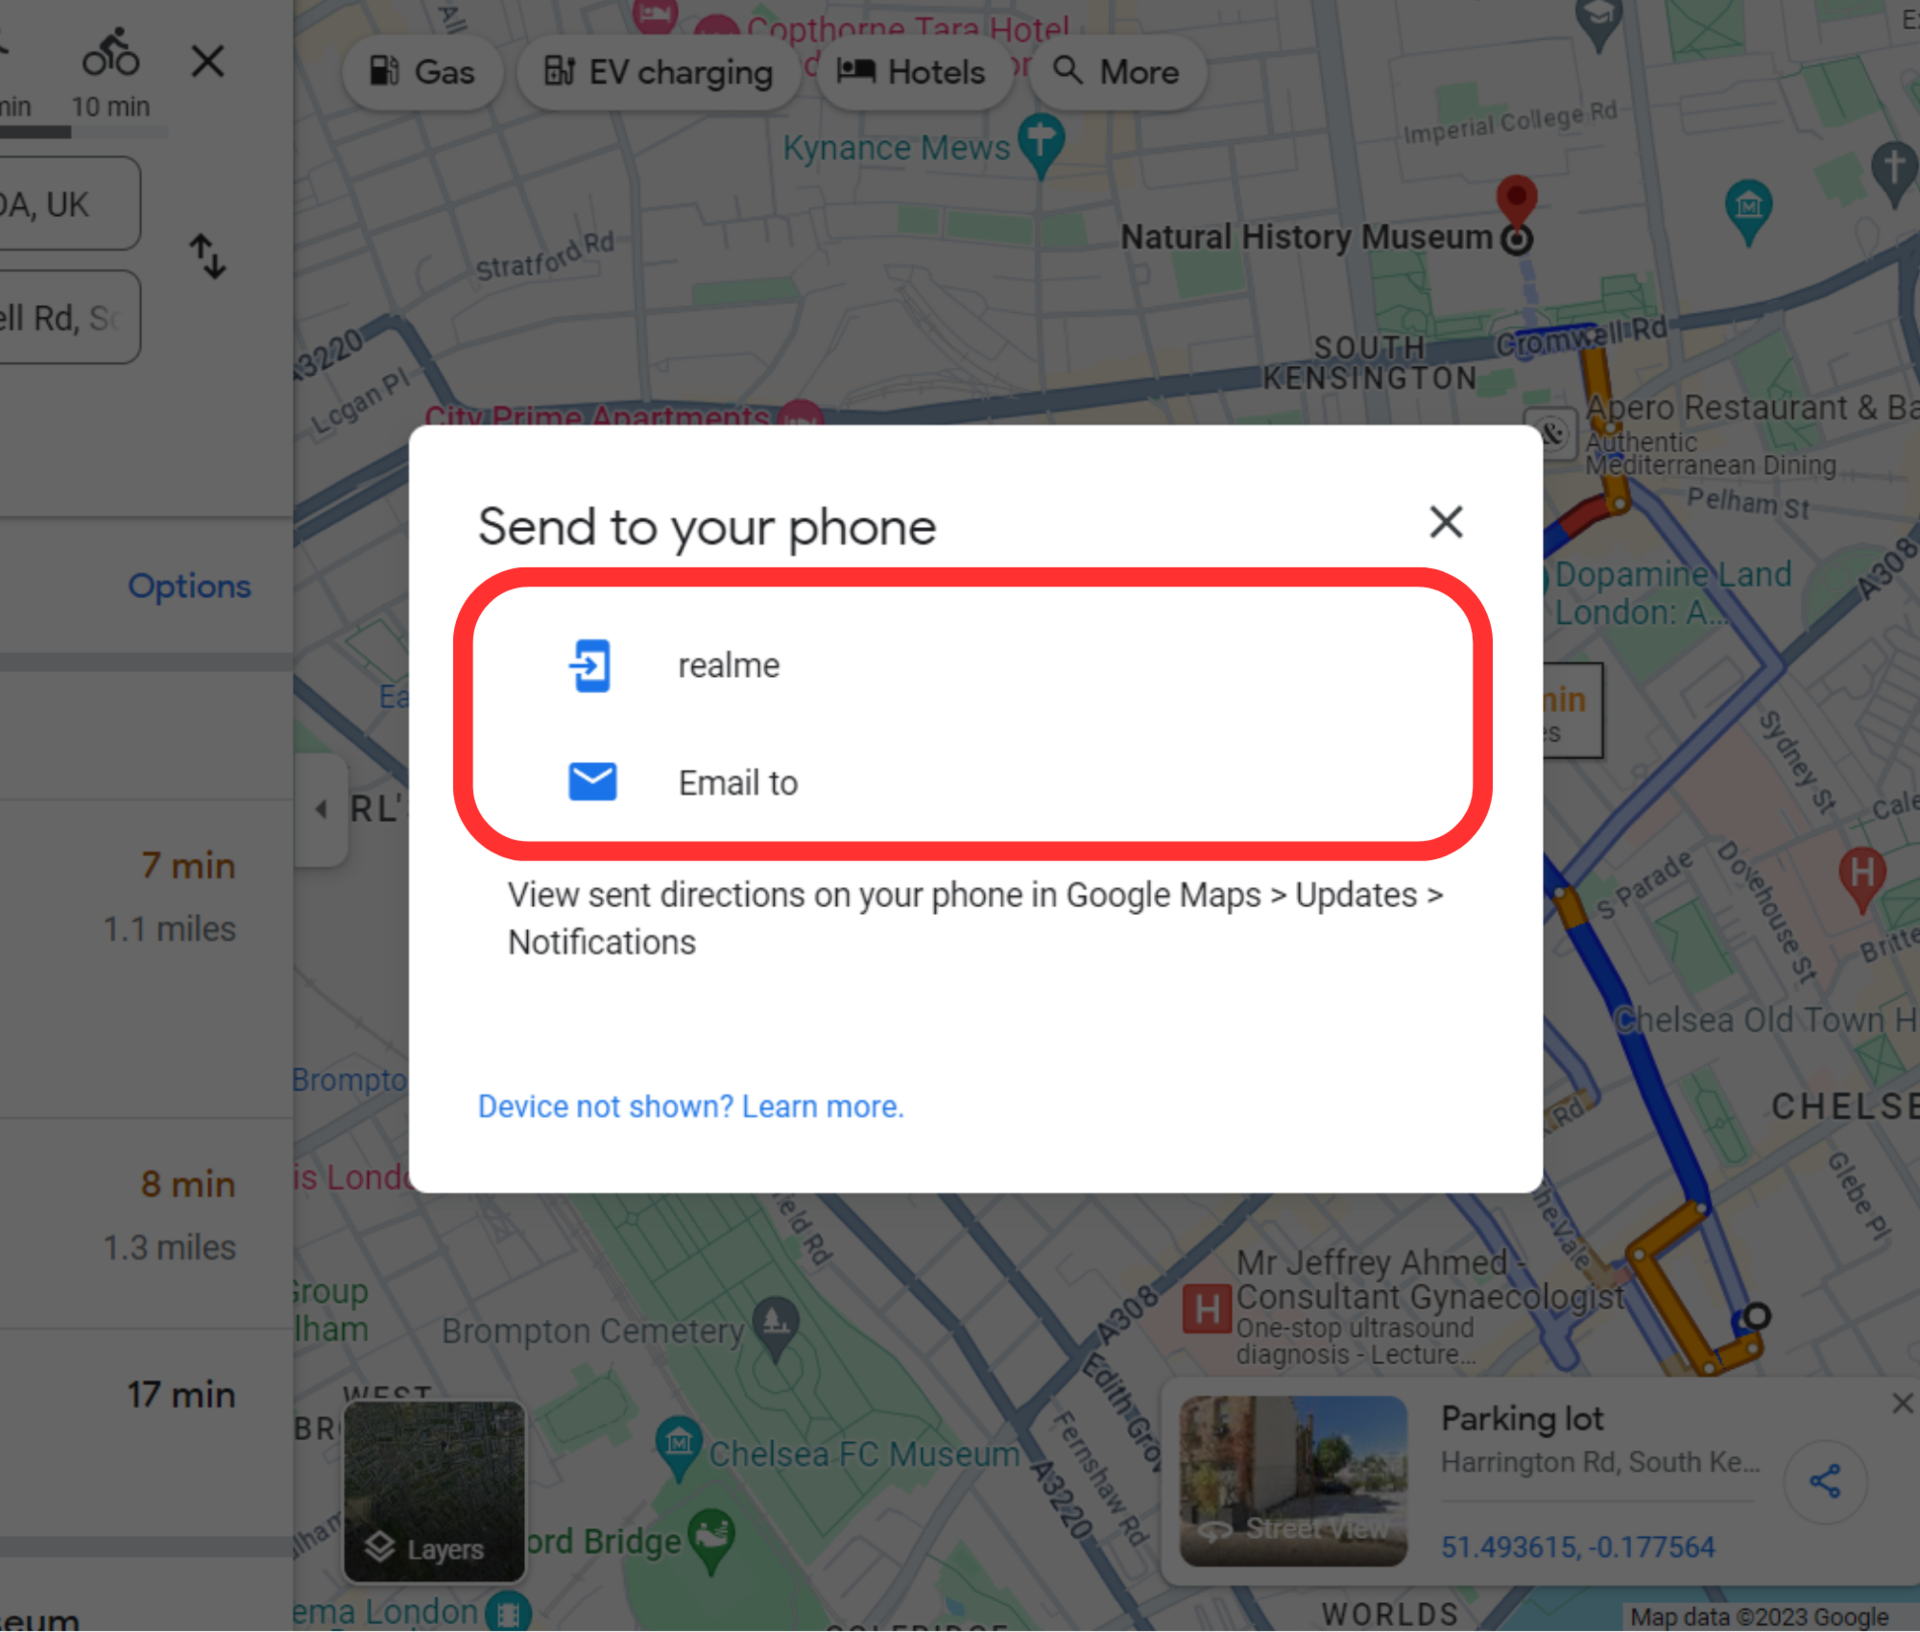 Google maps desktop directions send to your phone options